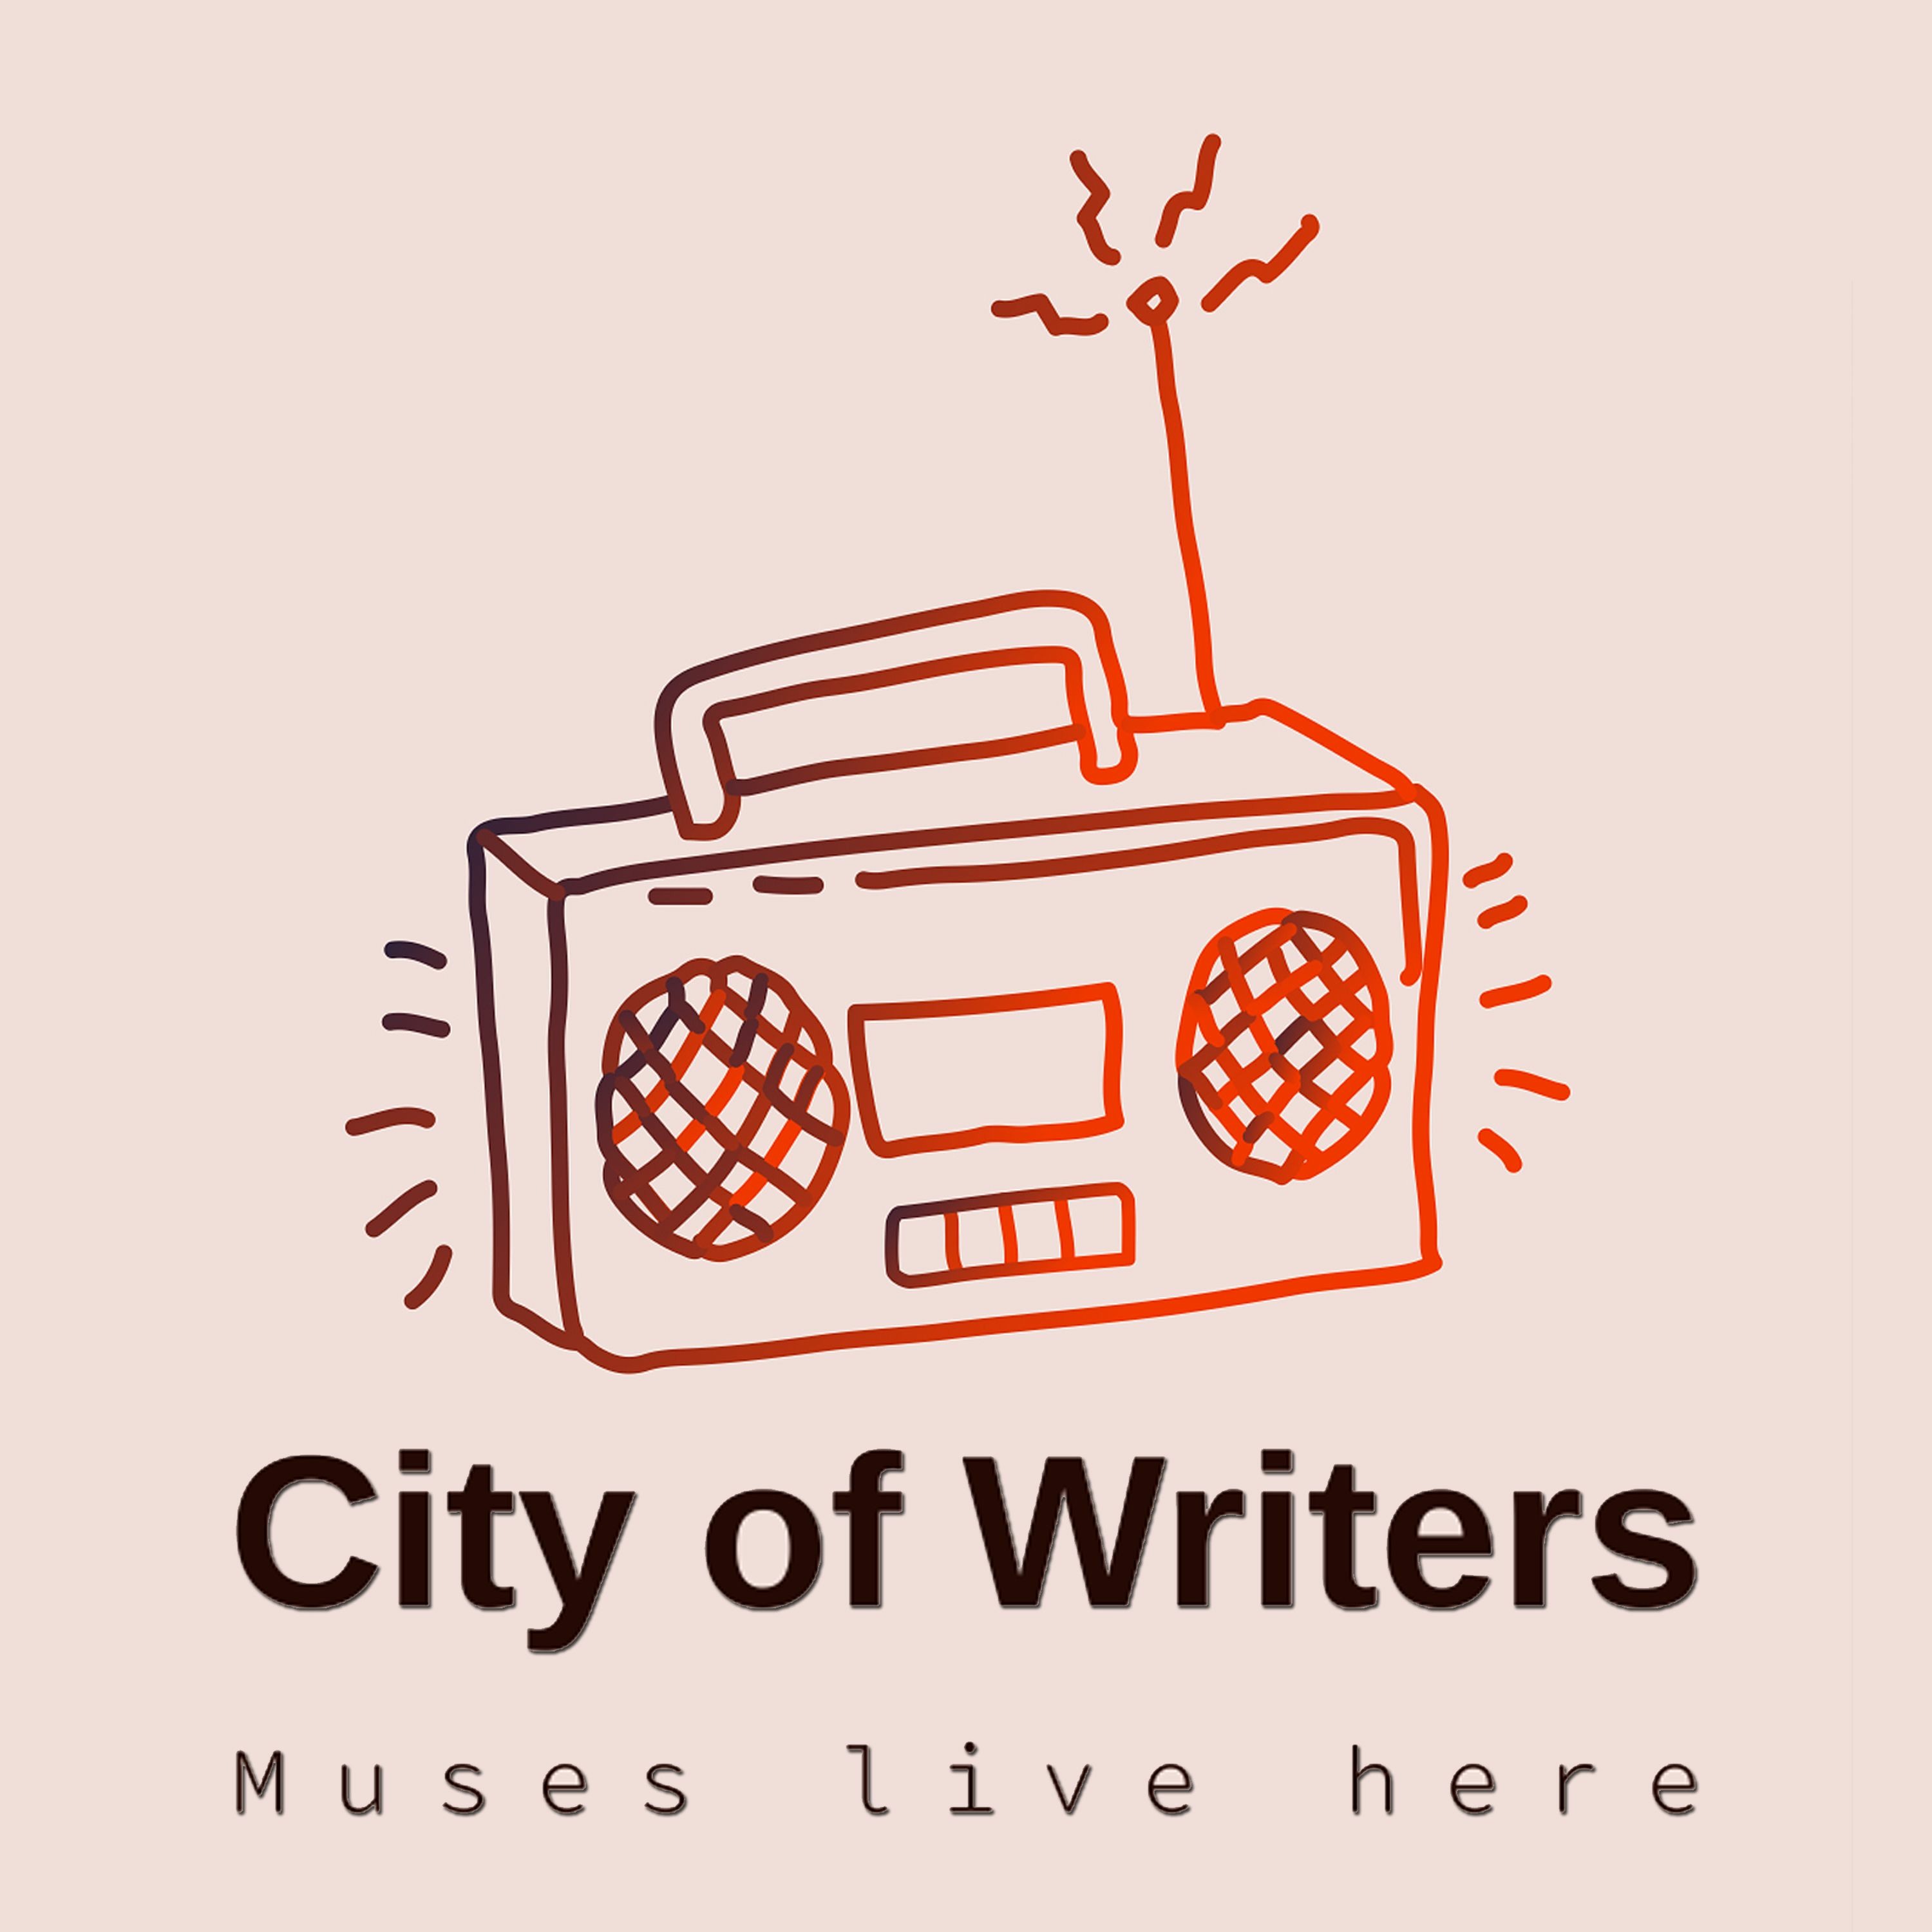 Welcome to City of Writers!